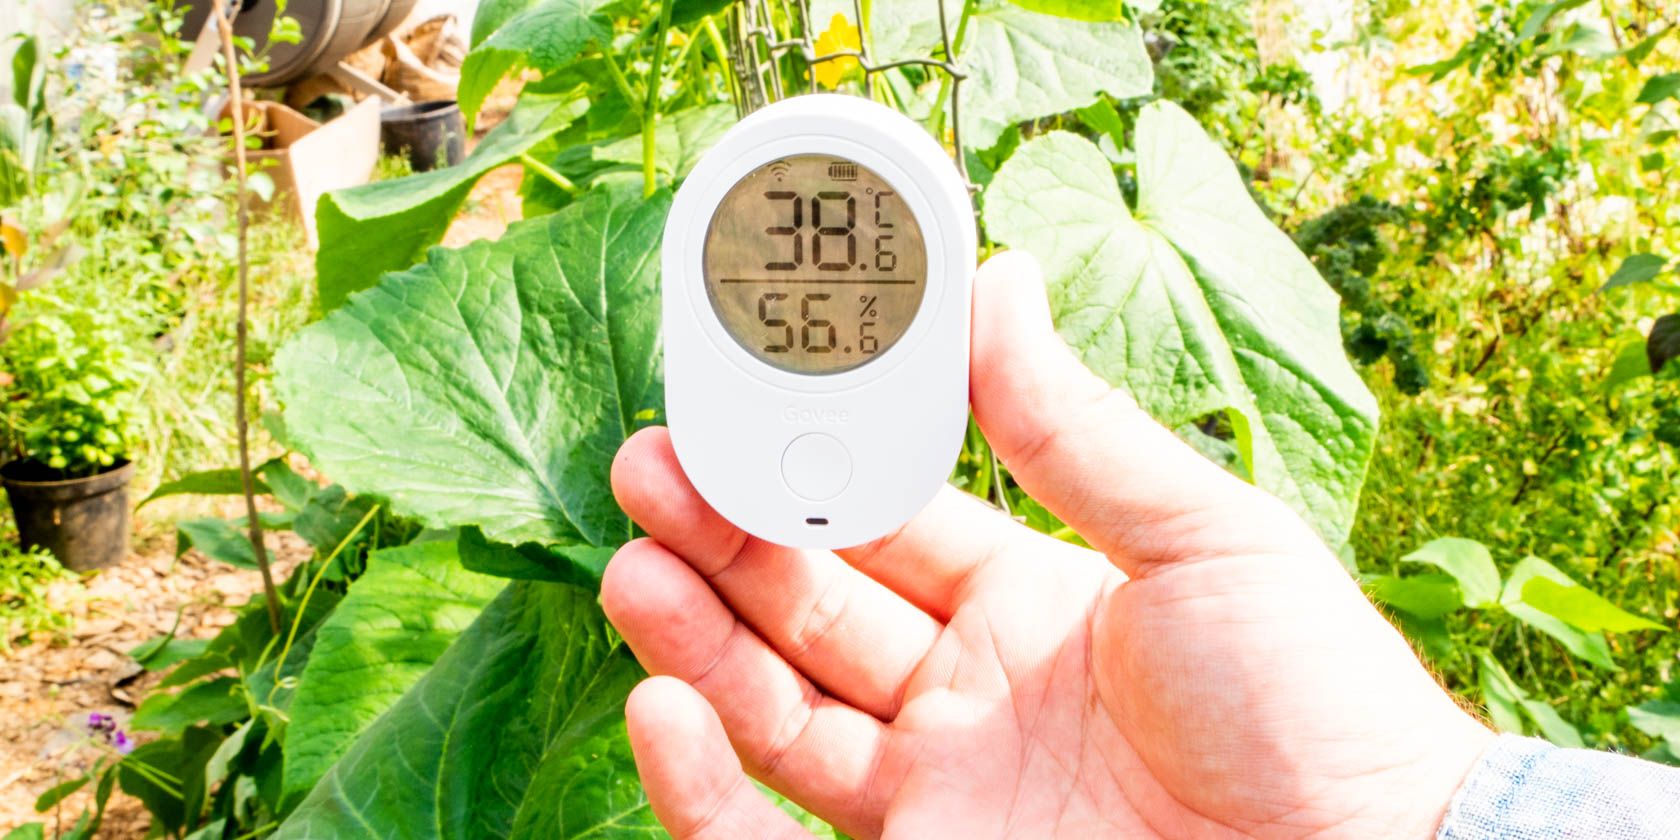 No More Dead Plants, with The Govee Wi-Fi Temperature and Humidity